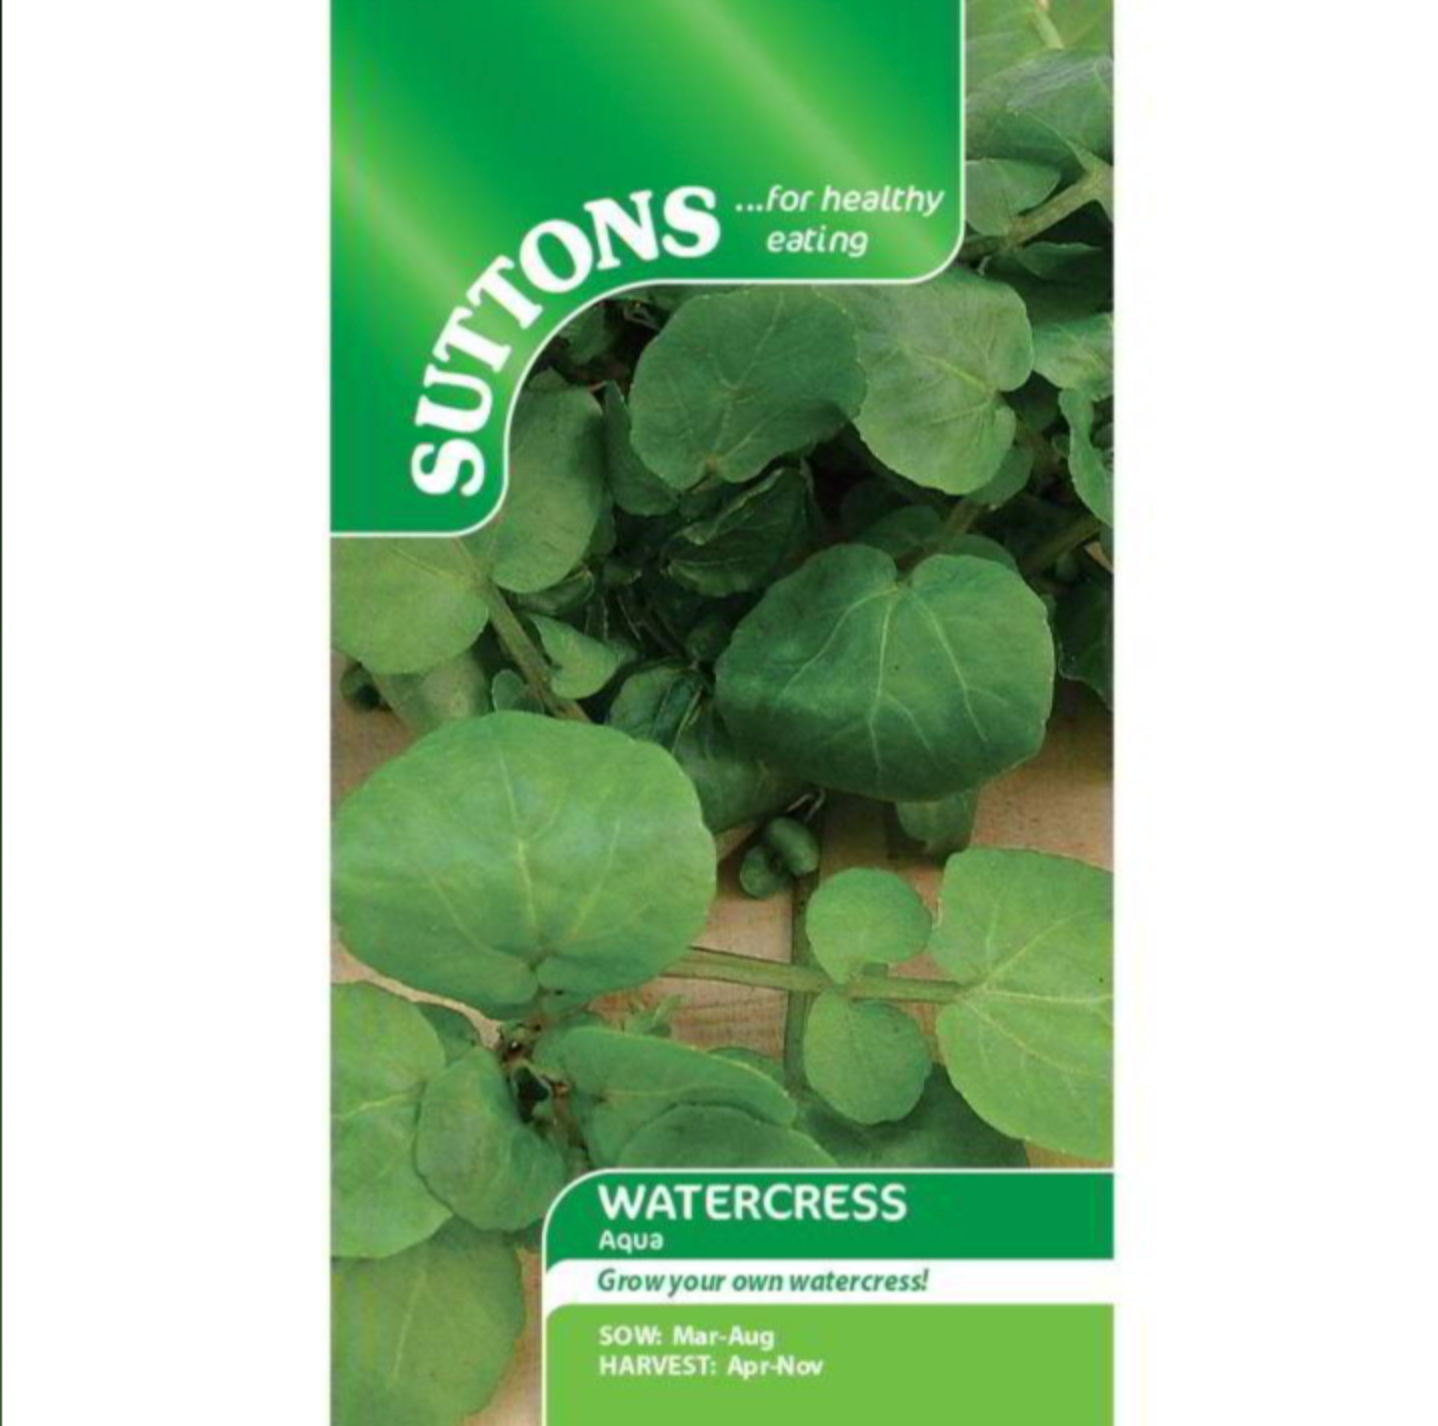 Suttons 'Salad Seeds' - Lettuce, Tomatoes, Cress, Peppers, Cucumber etc